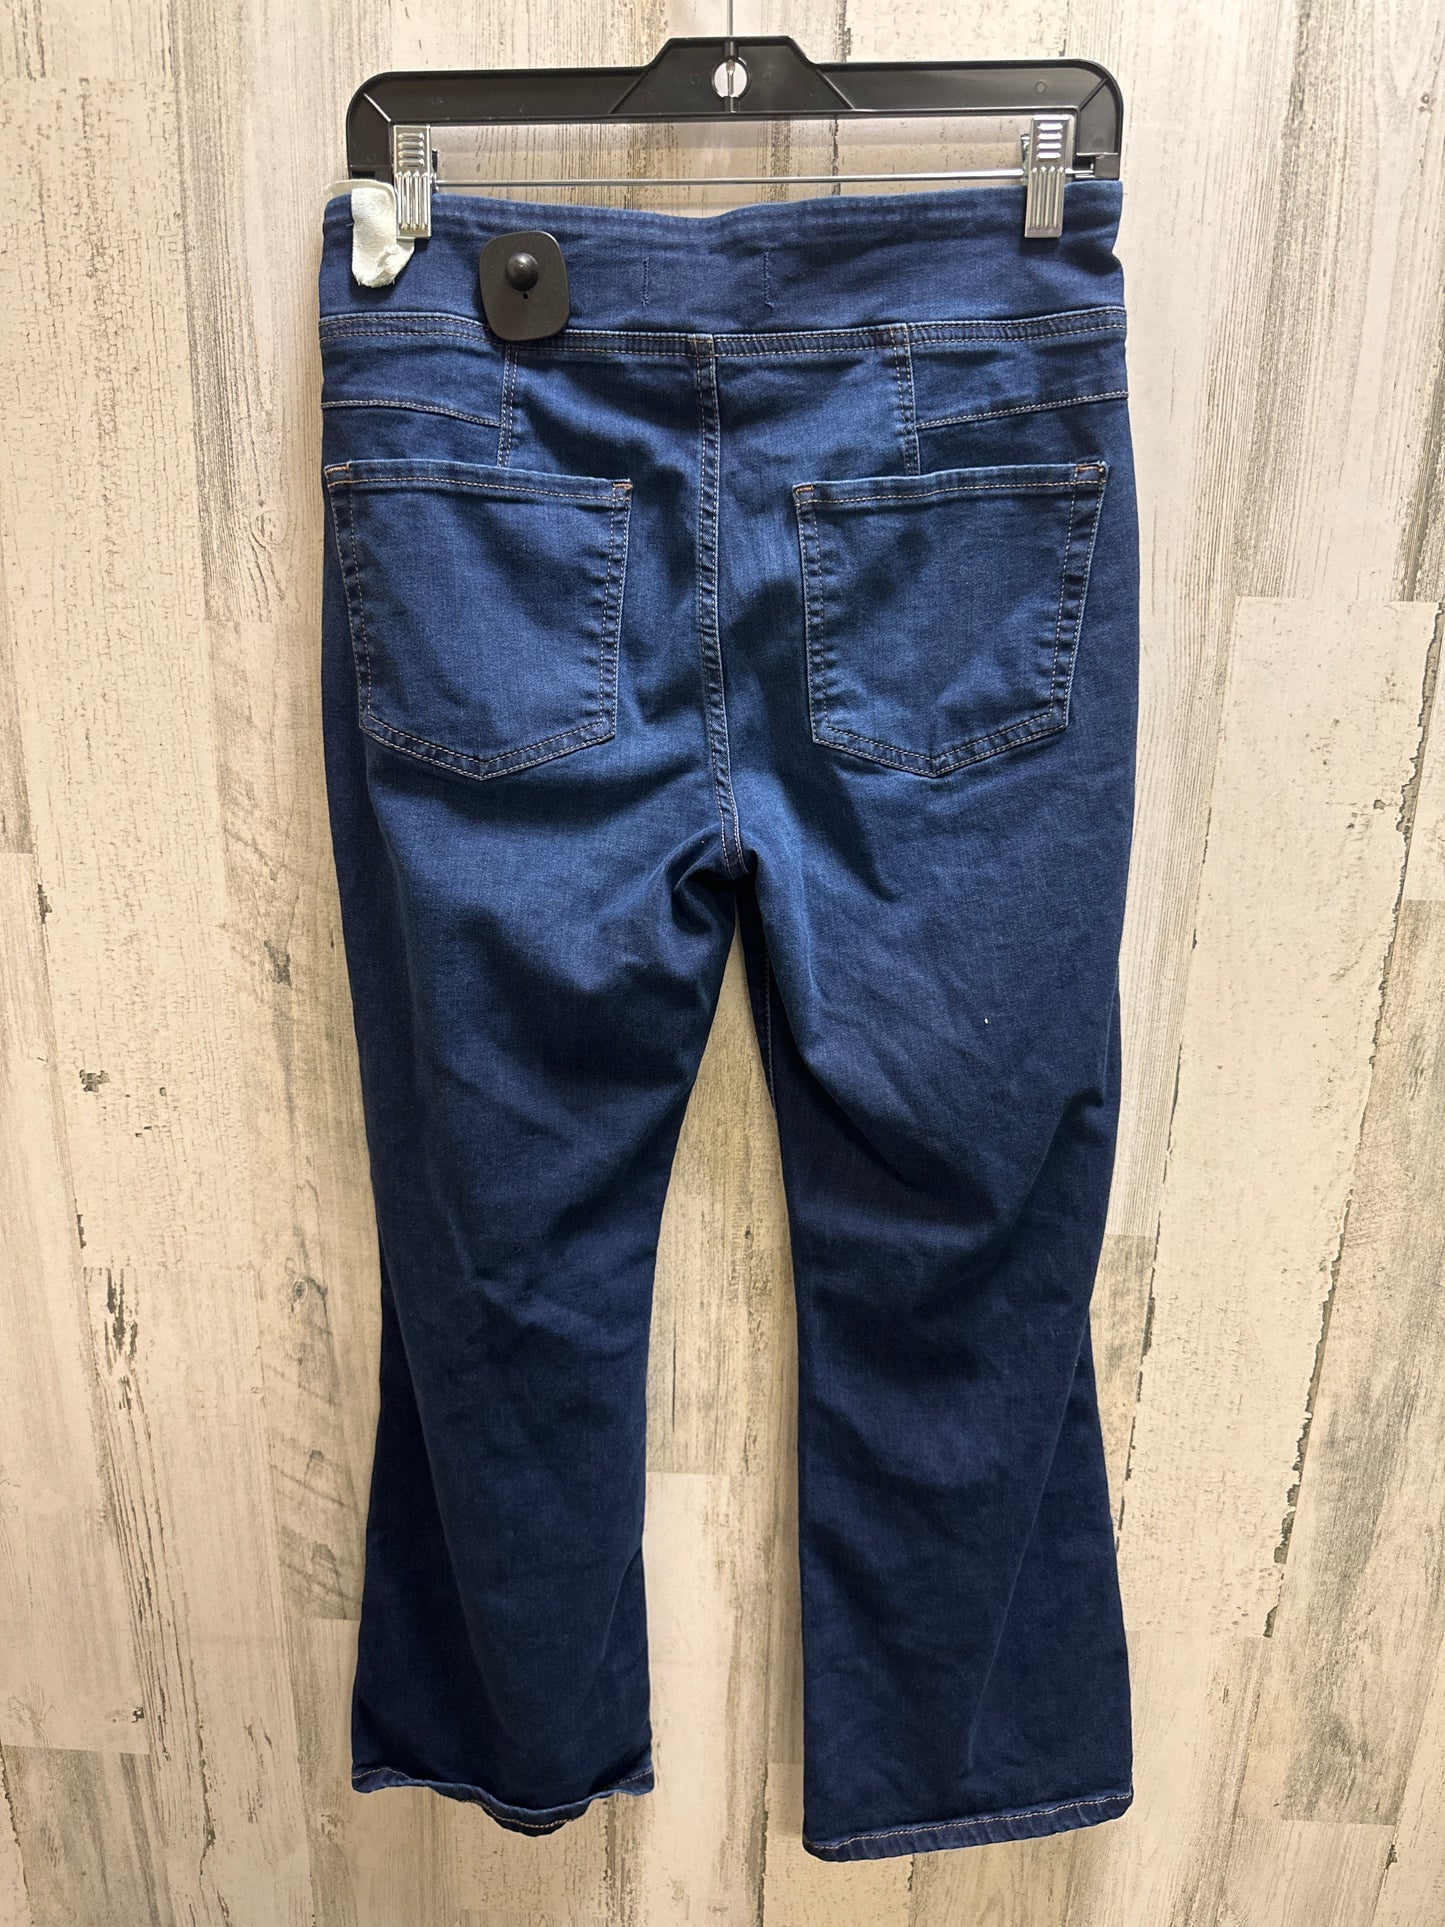 Blue Denim Jeans Boot Cut We The Free, Size S